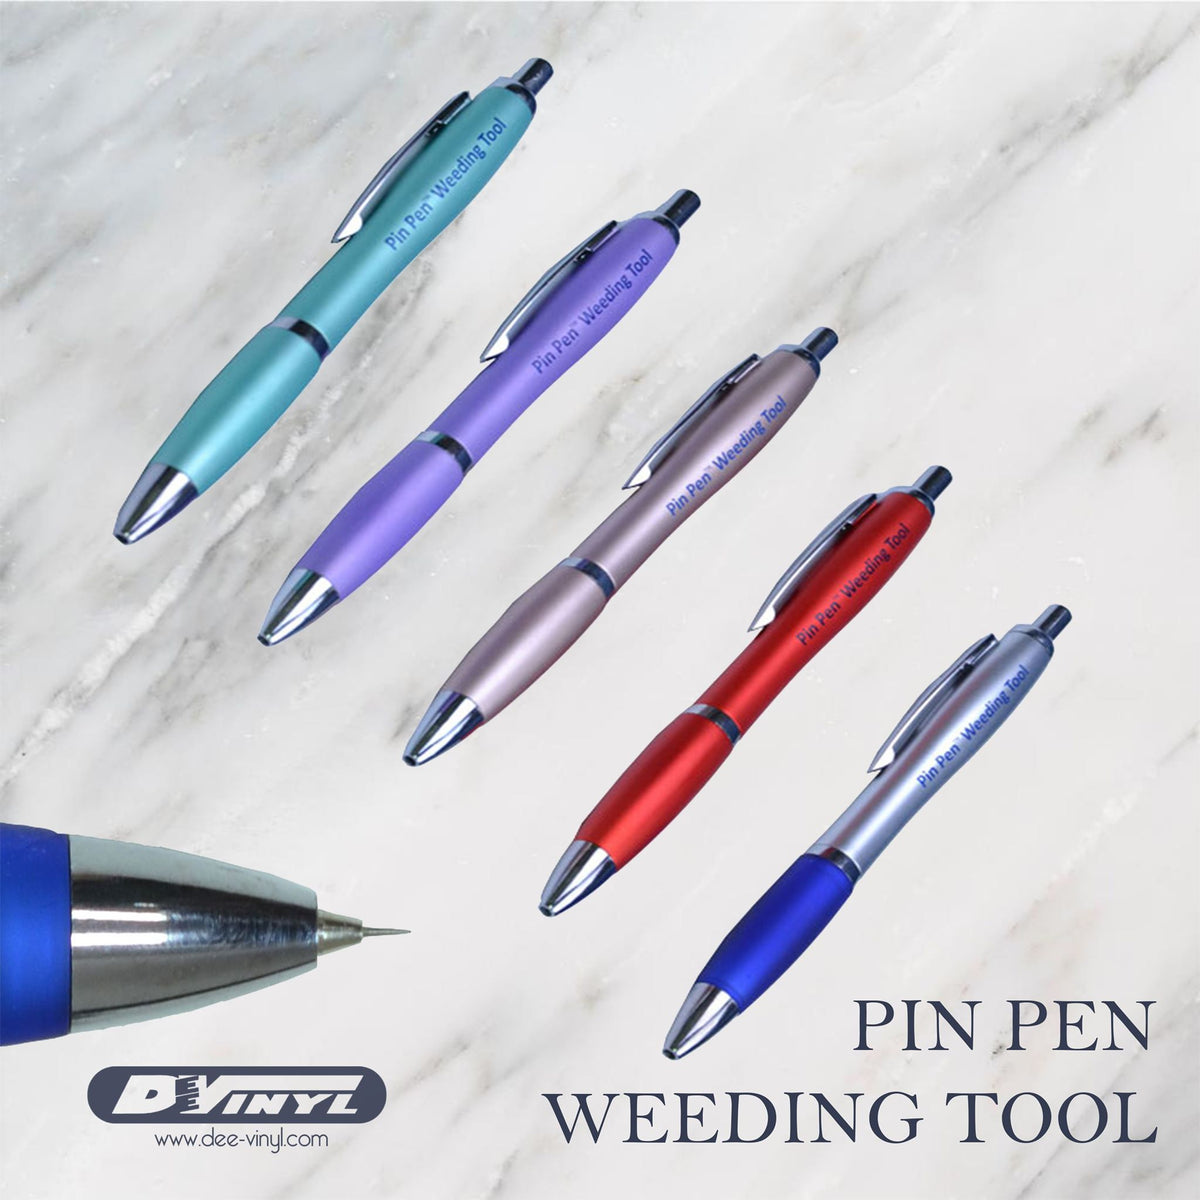 Vinyl Empire - Craft Life is so much better with a Pin Pen weeding tool.  You will not be disappointed. $10.00 each